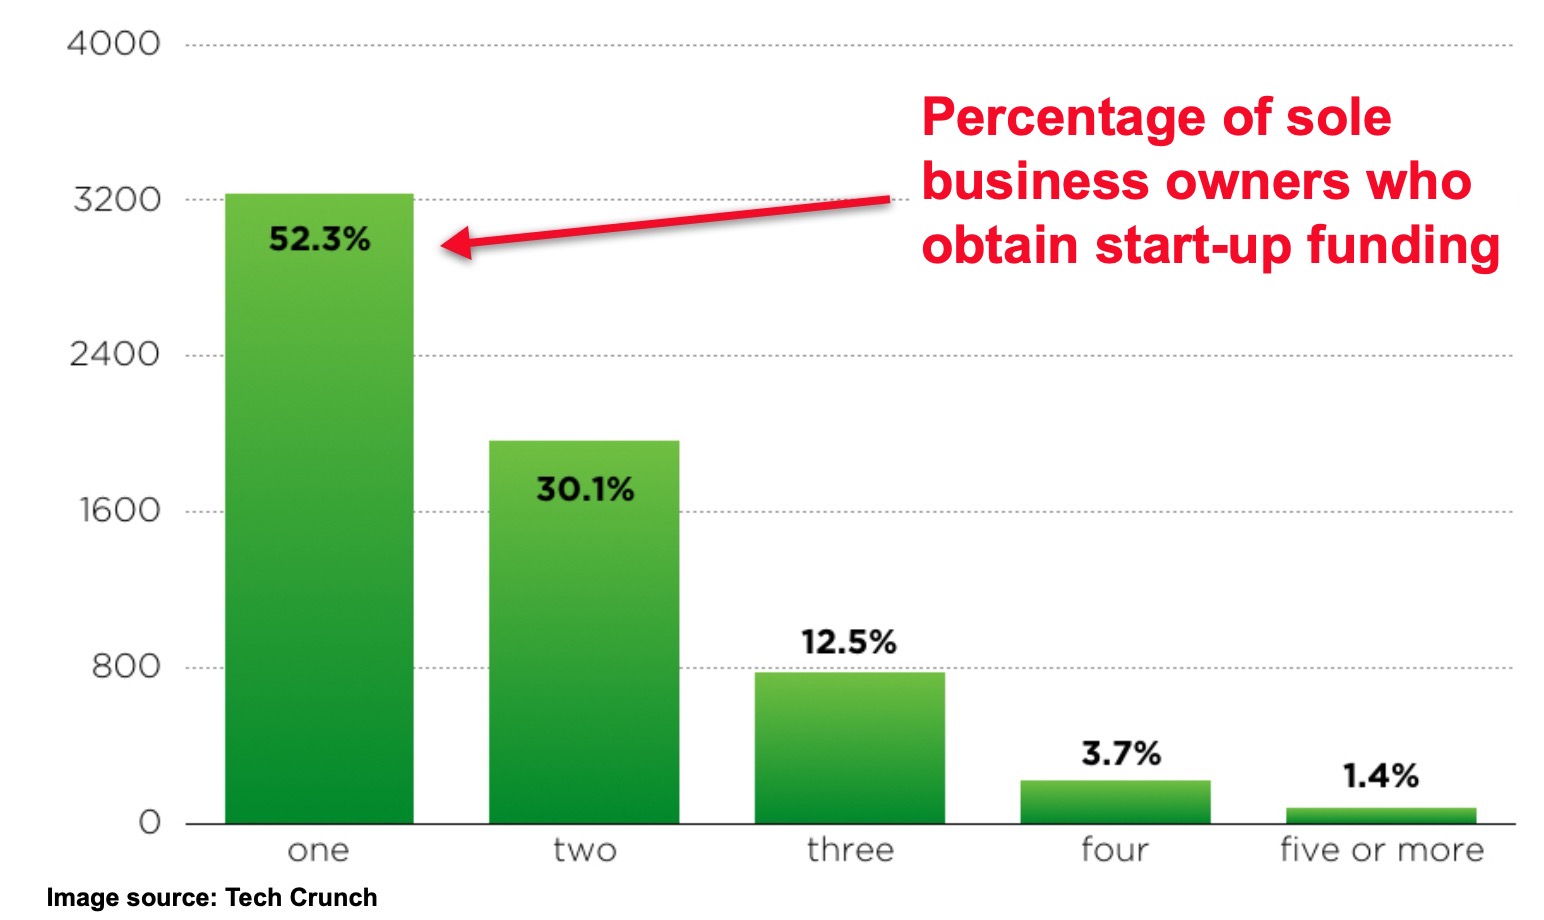 Percentage of Sole Business Owners